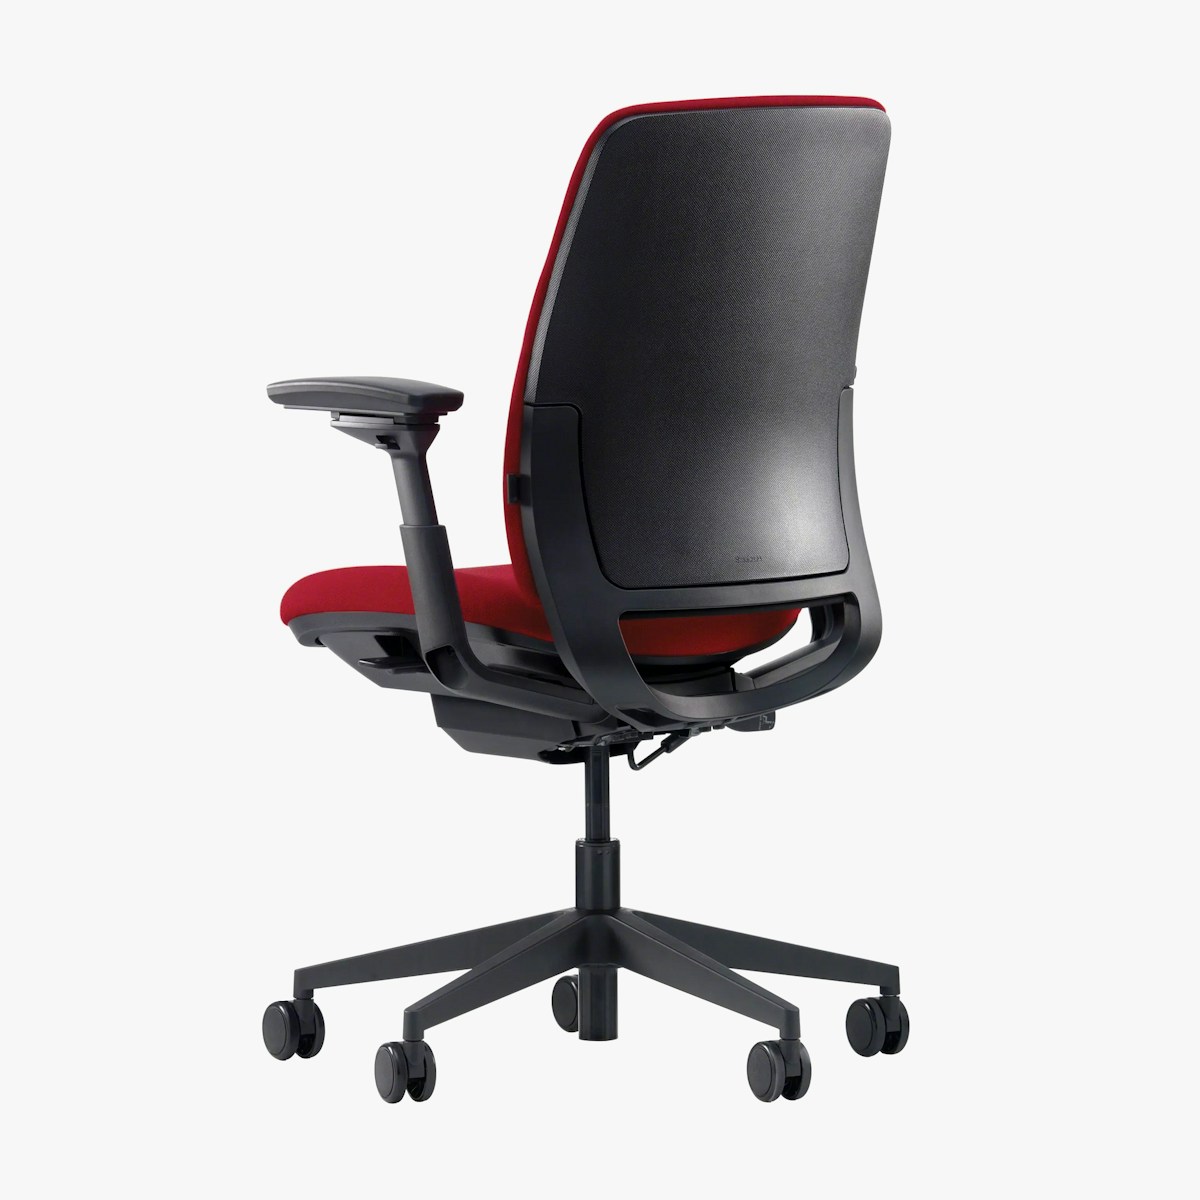 Steelcase Amia Air Office Chair Sc482amiaair At Pure Design Seating Workspace Furniture For The Home Office Home Office And More At Pure Design Online